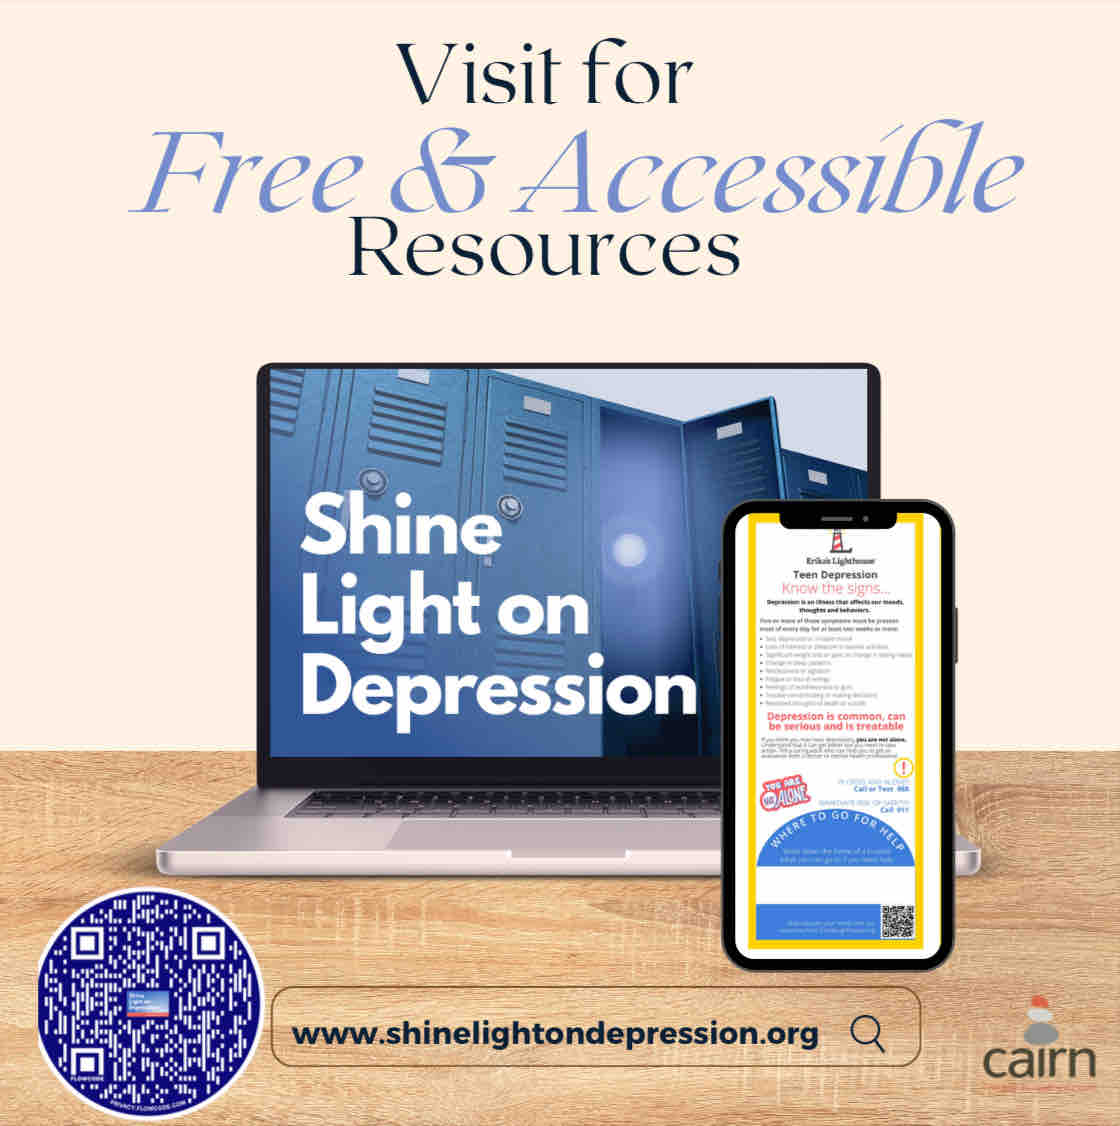 Need activities and curriculum for youth regarding #mentalhealth? Visit shinelightondepression.org!
#schoolhealth #wscc #education